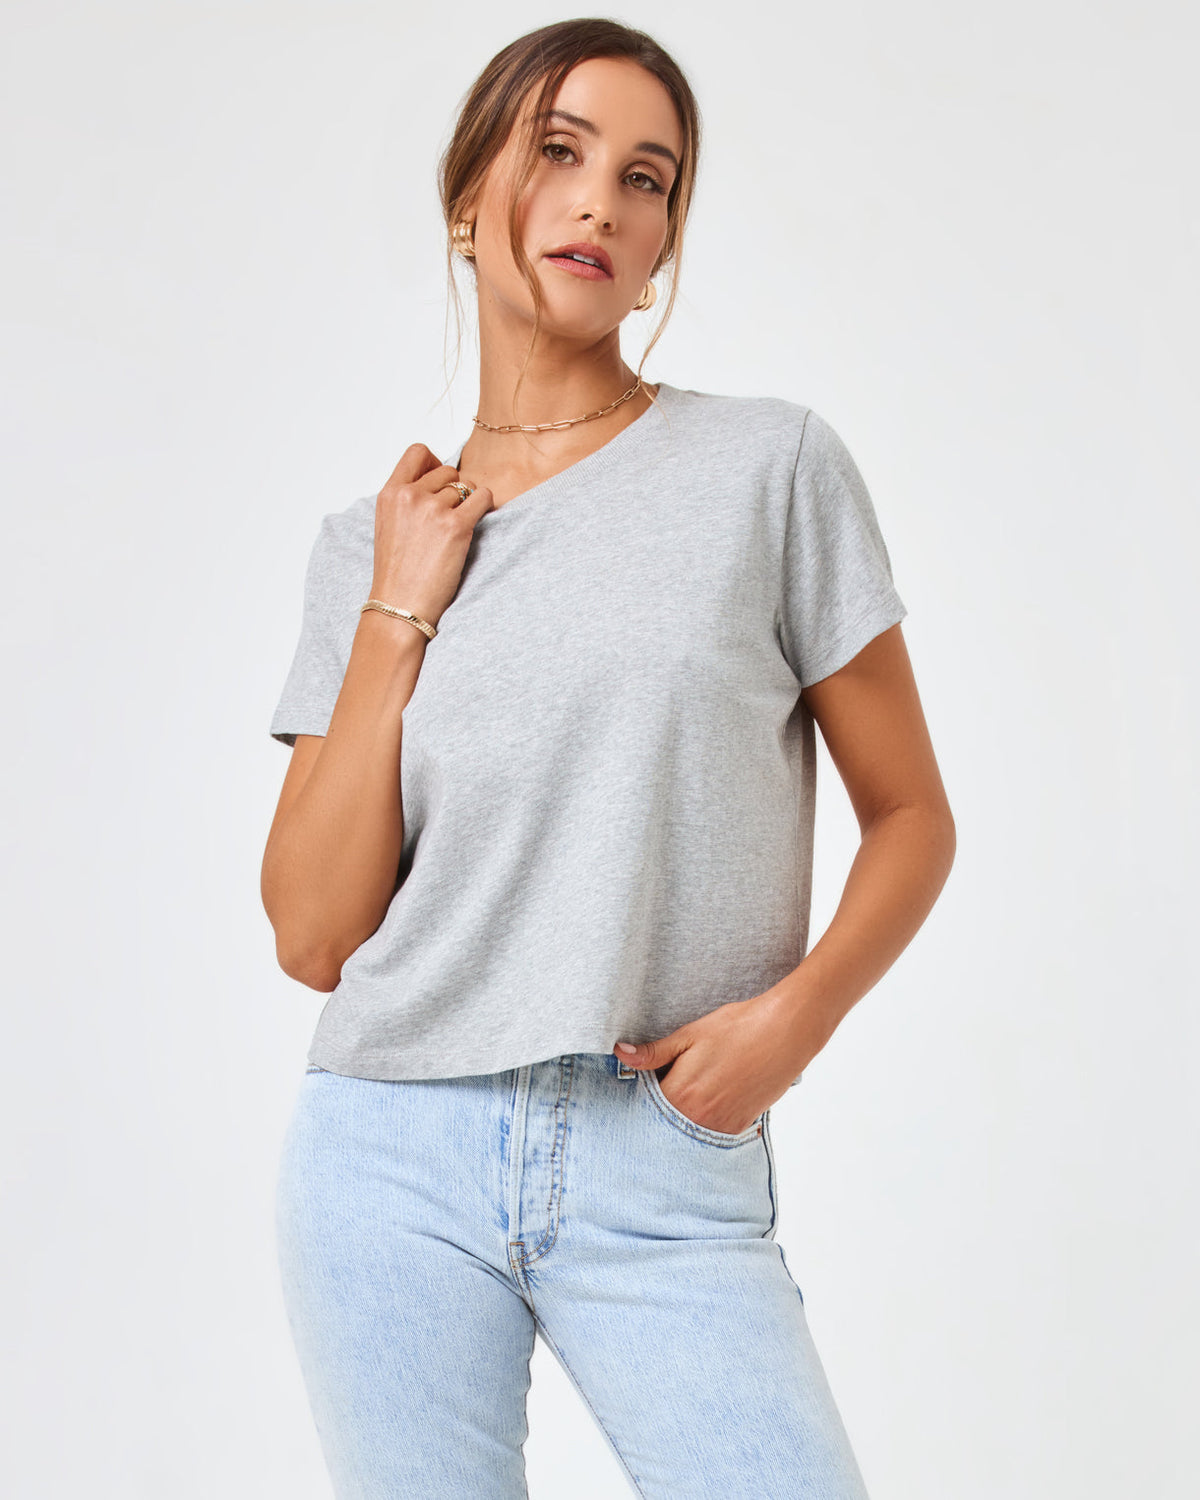 All Day Top - Heather Grey Heather Grey | Model: Anna (size: S)